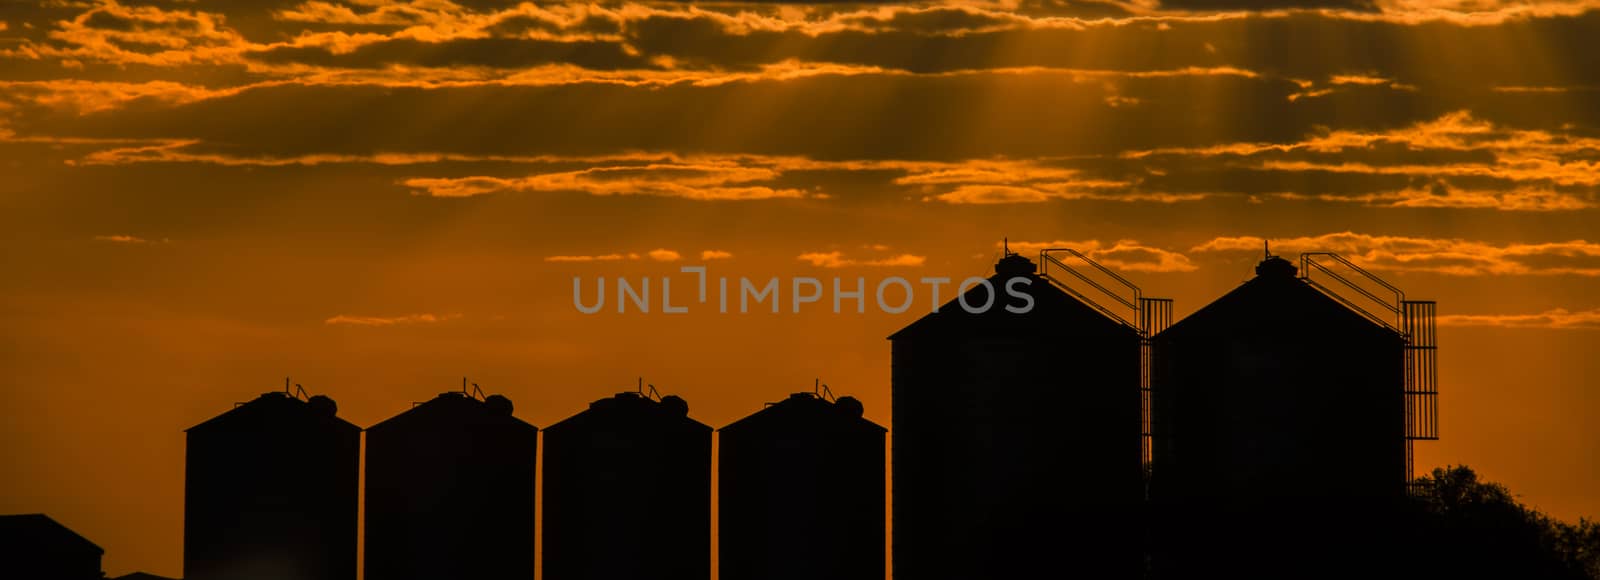 Agricultural silos, storage and drying for sunflower, soy, corn, wheat and grains.